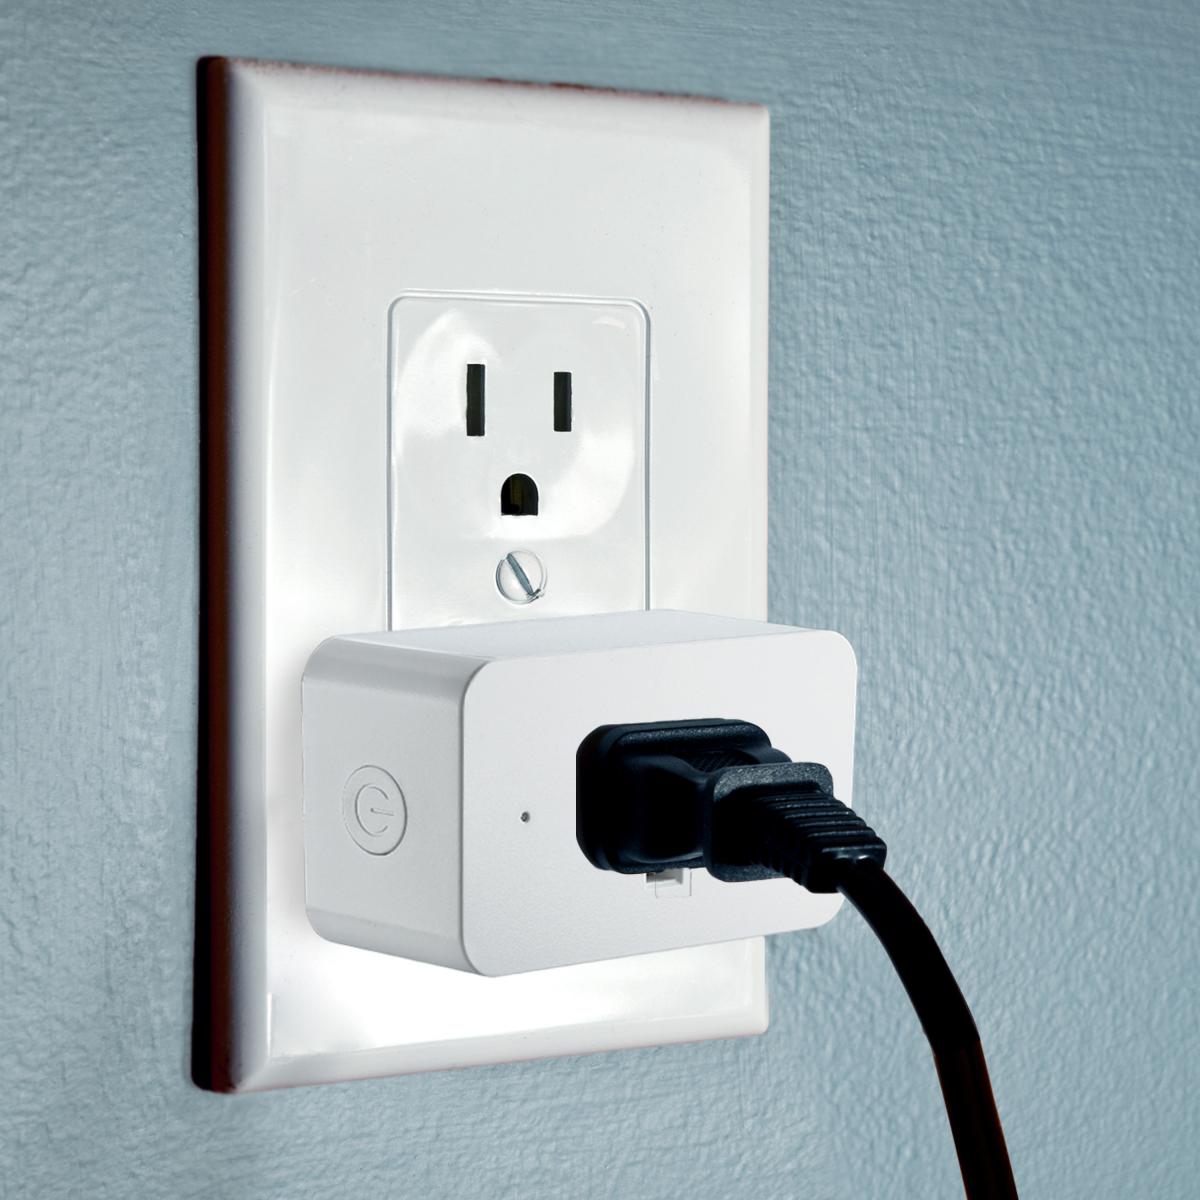 SATCO - STARFISH WIFI SMART PLUG-IN OUTLET- 15 AMP